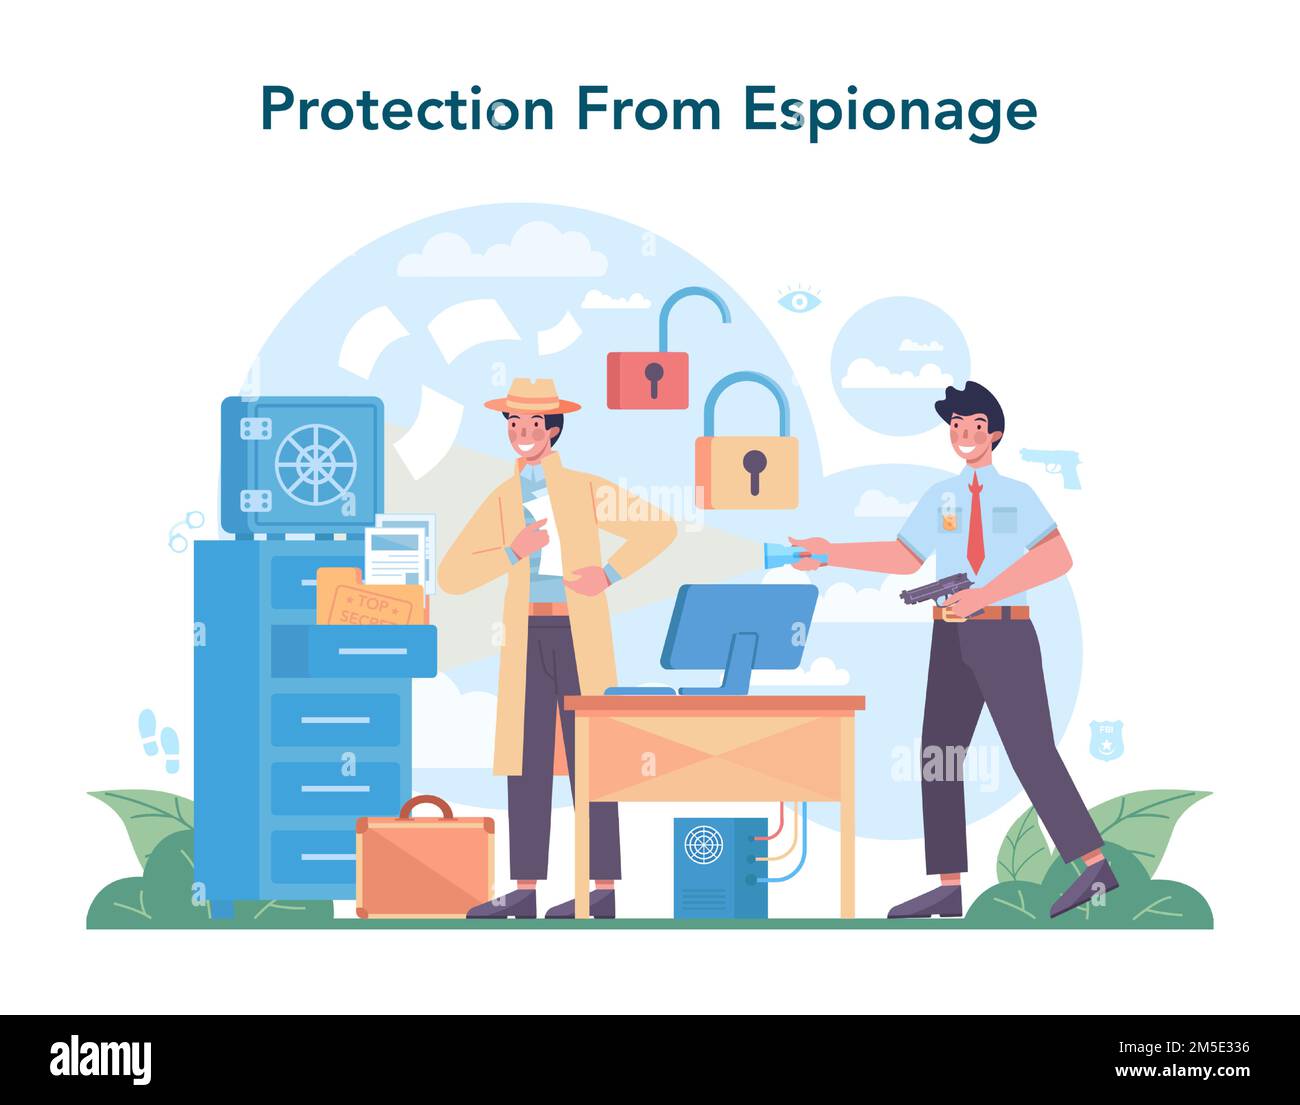 FBI agent concept. Police officer or inspector investigating crime. Protection of espionage, cyberattack and terrorist. Isolated flat vector illustrat Stock Vector